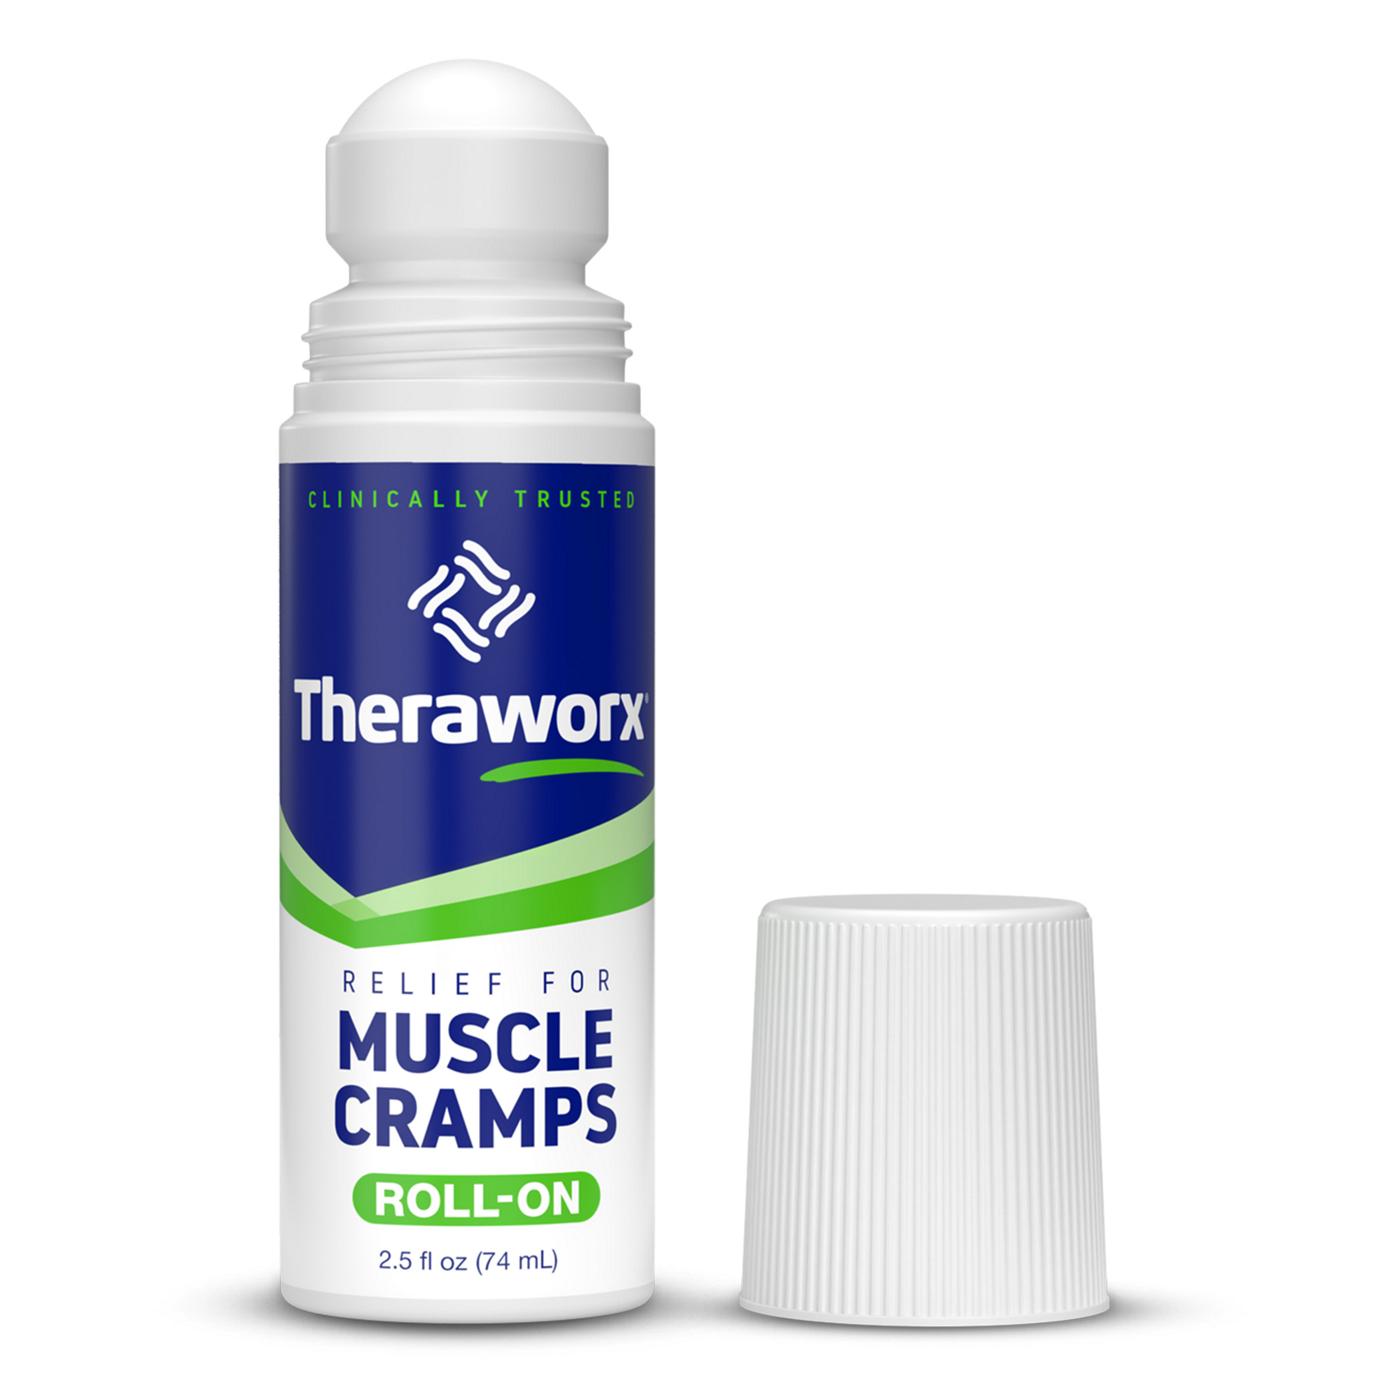 Theraworx Relief for Muscle Cramps Roll On; image 4 of 5